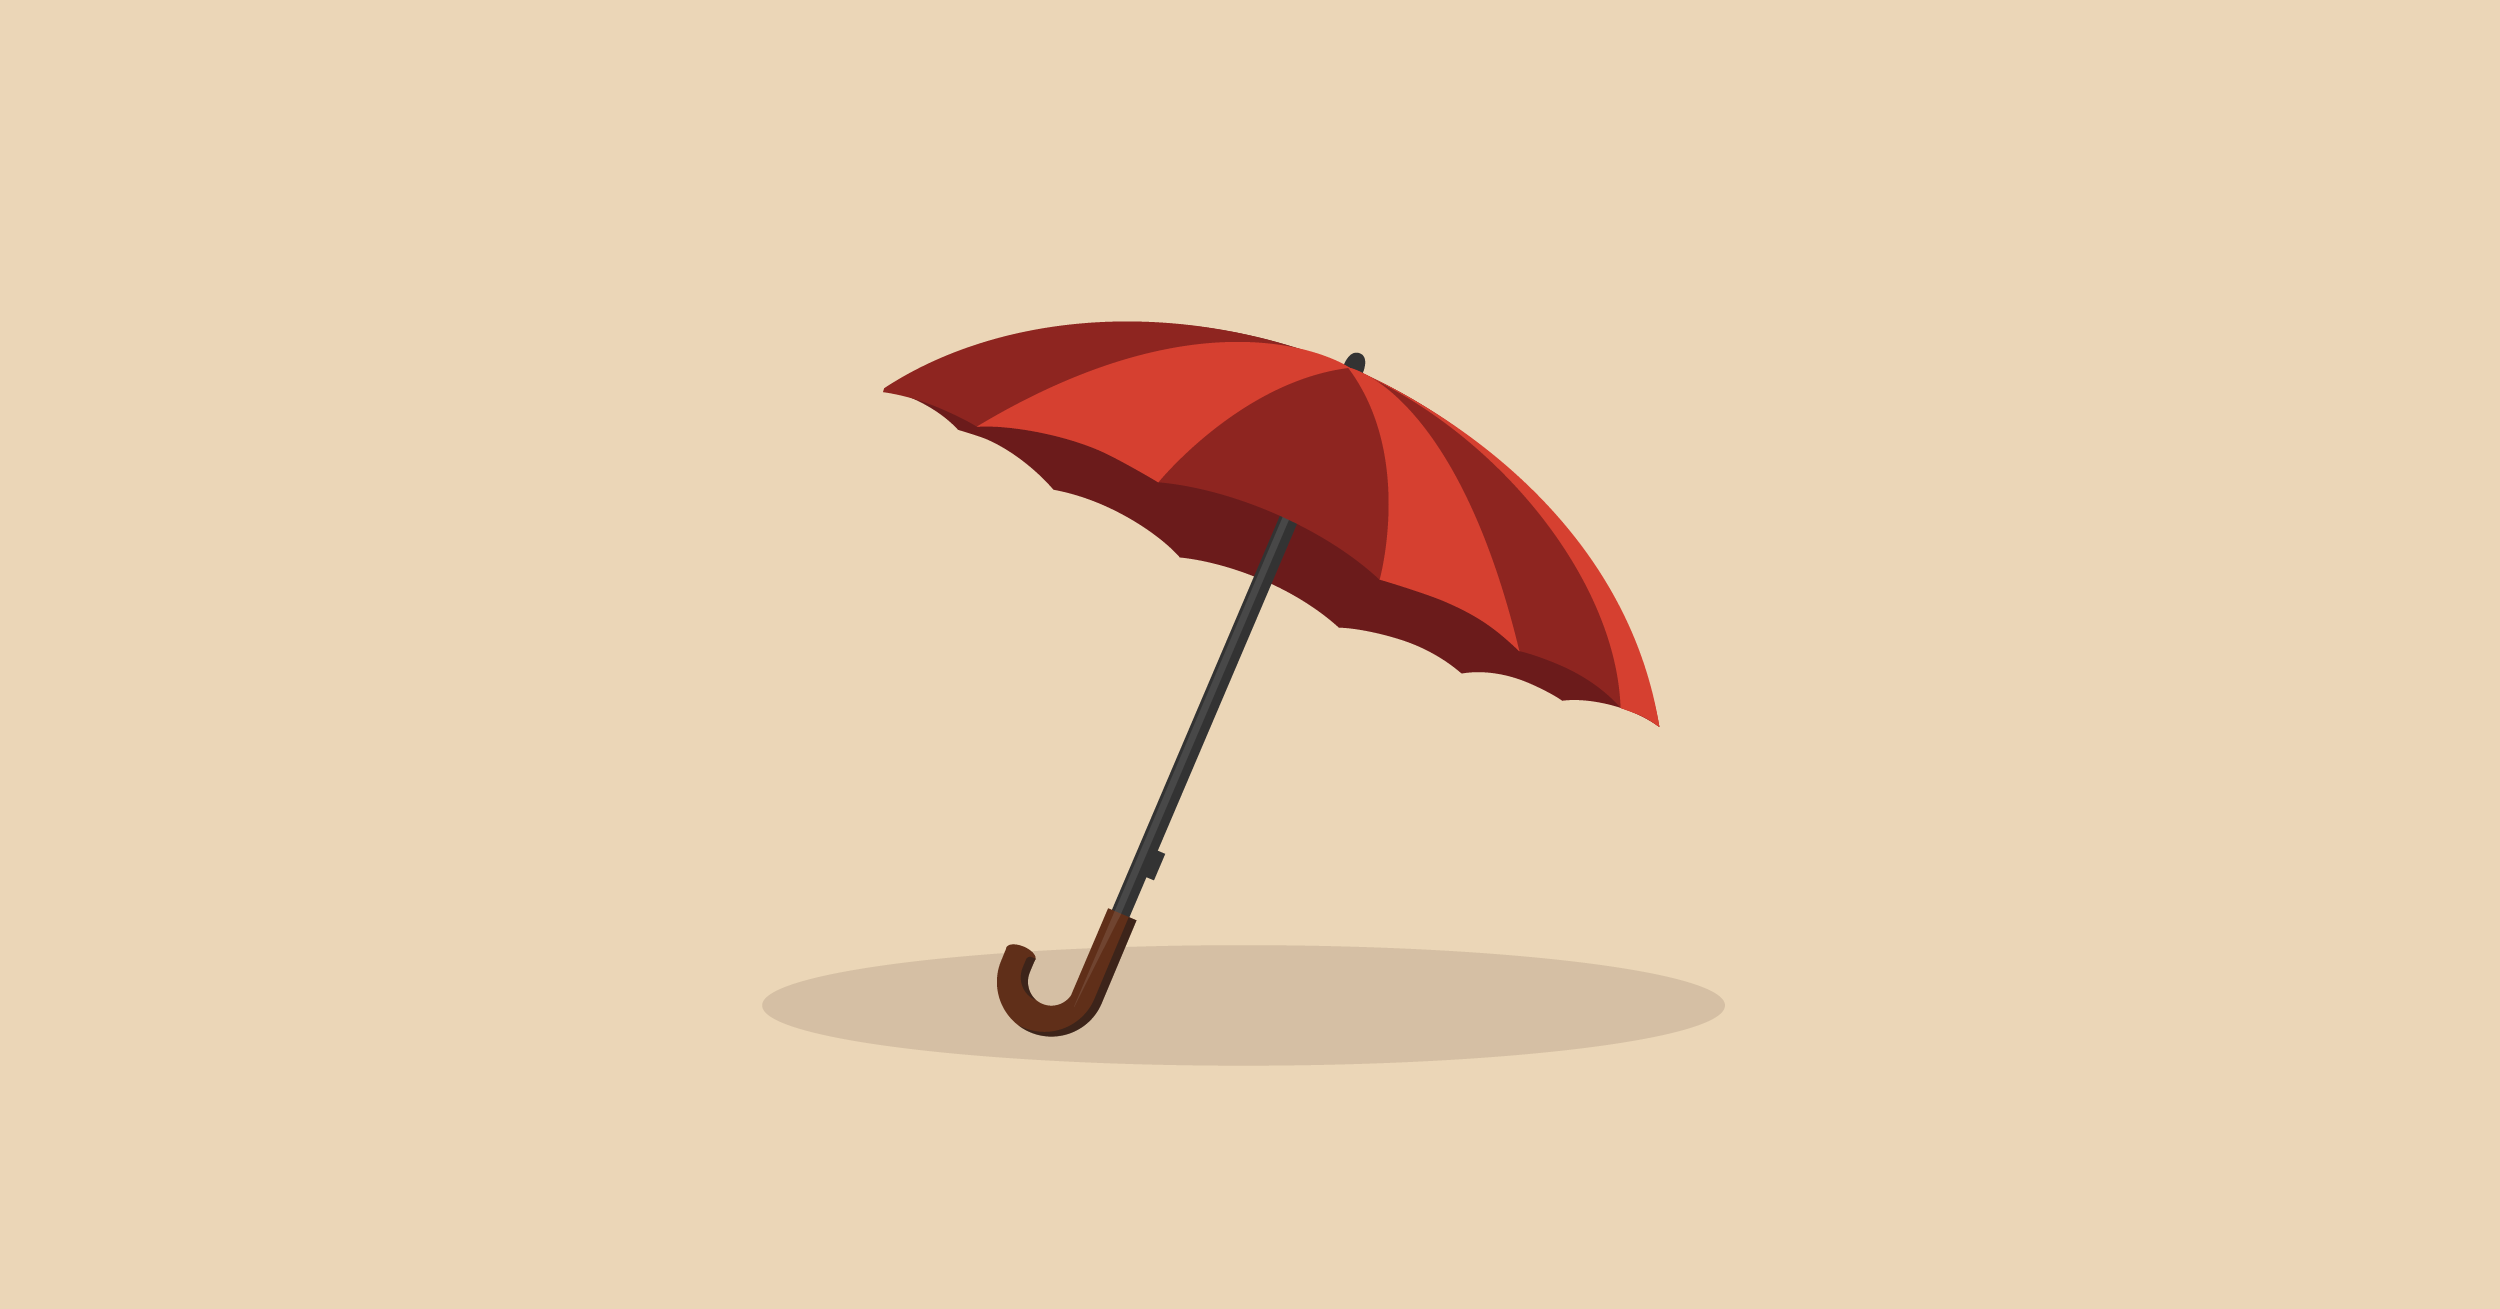 Image of an umbrella - how to pay off a credit card